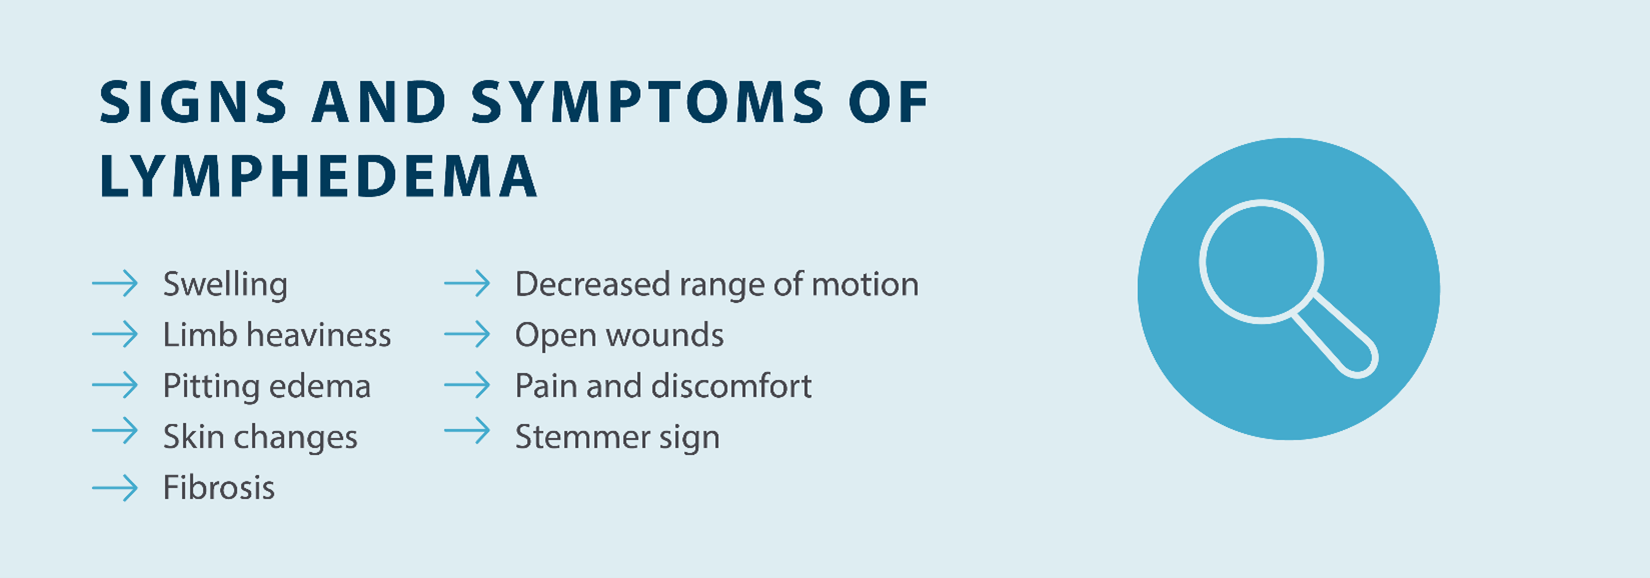 signs and symptoms of lymphedema